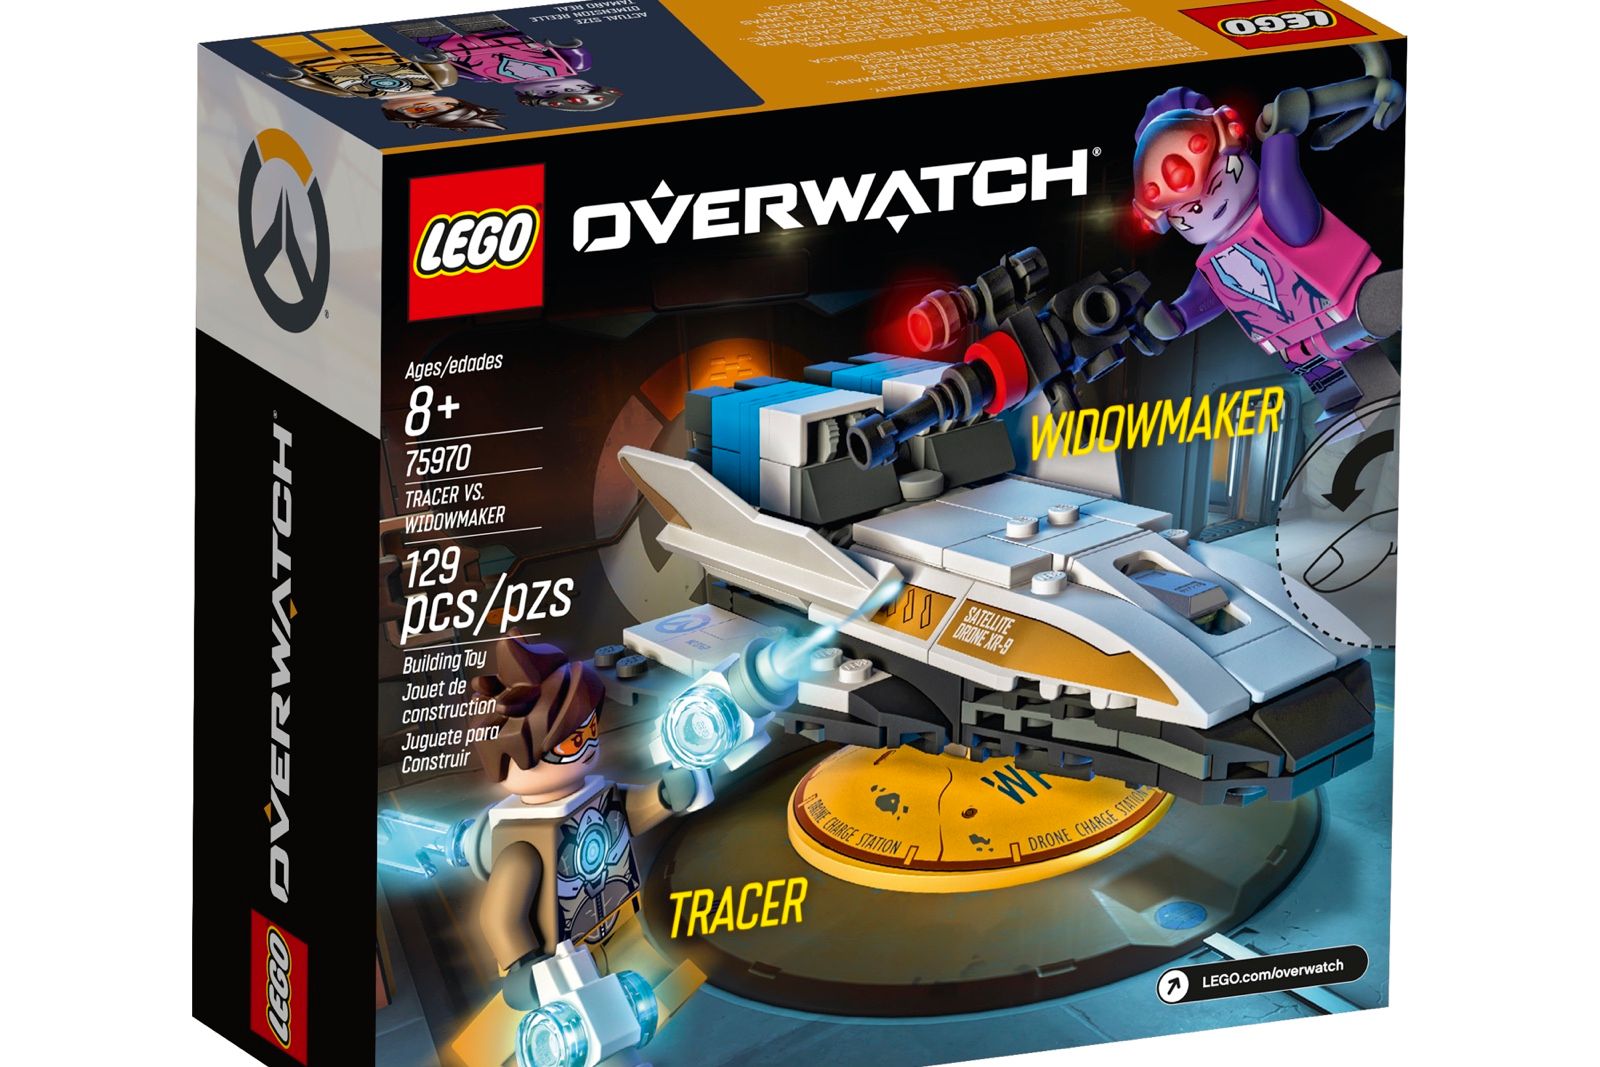 Lego reveals Overwatch sets and availability image 1